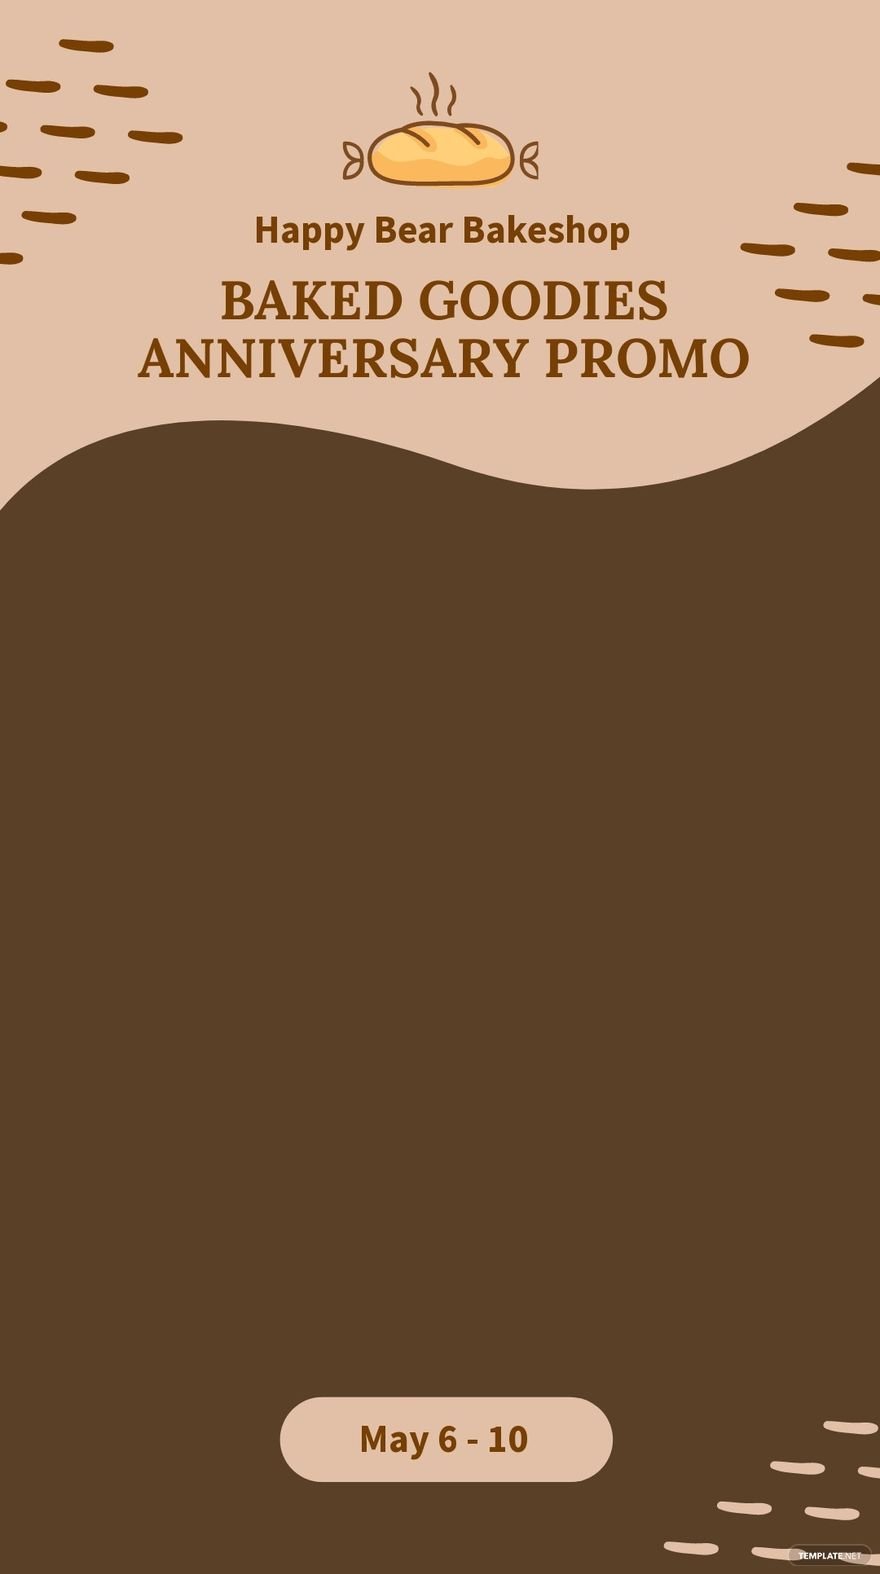 Free Anniversary Promotion Snapchat Geofilter Template